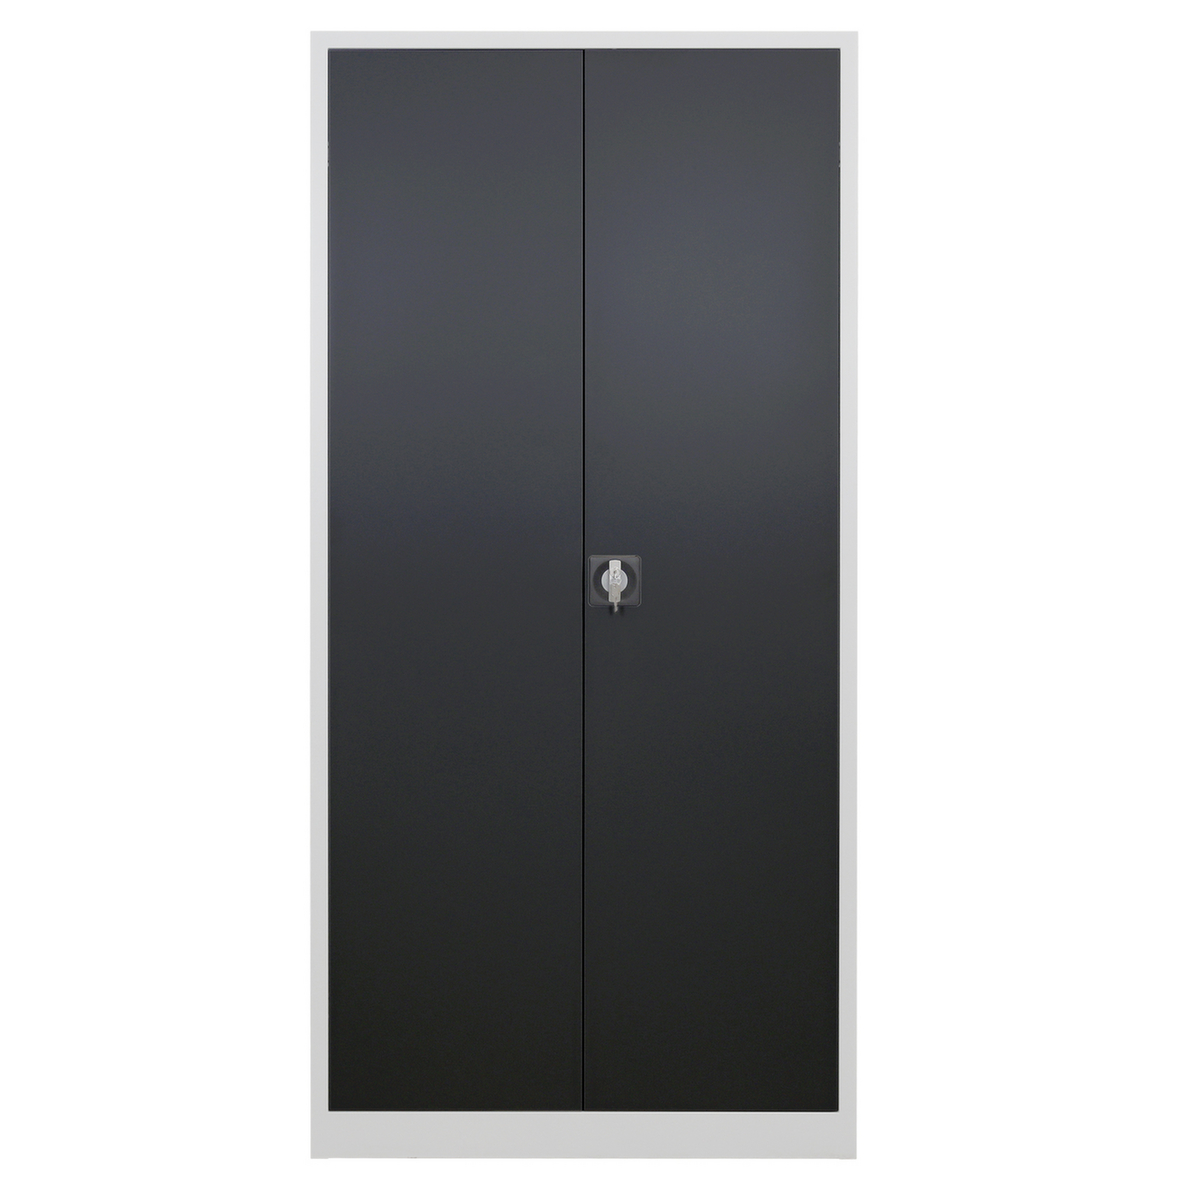 ADB Armoire universelle, largeur 920 mm  ZOOM